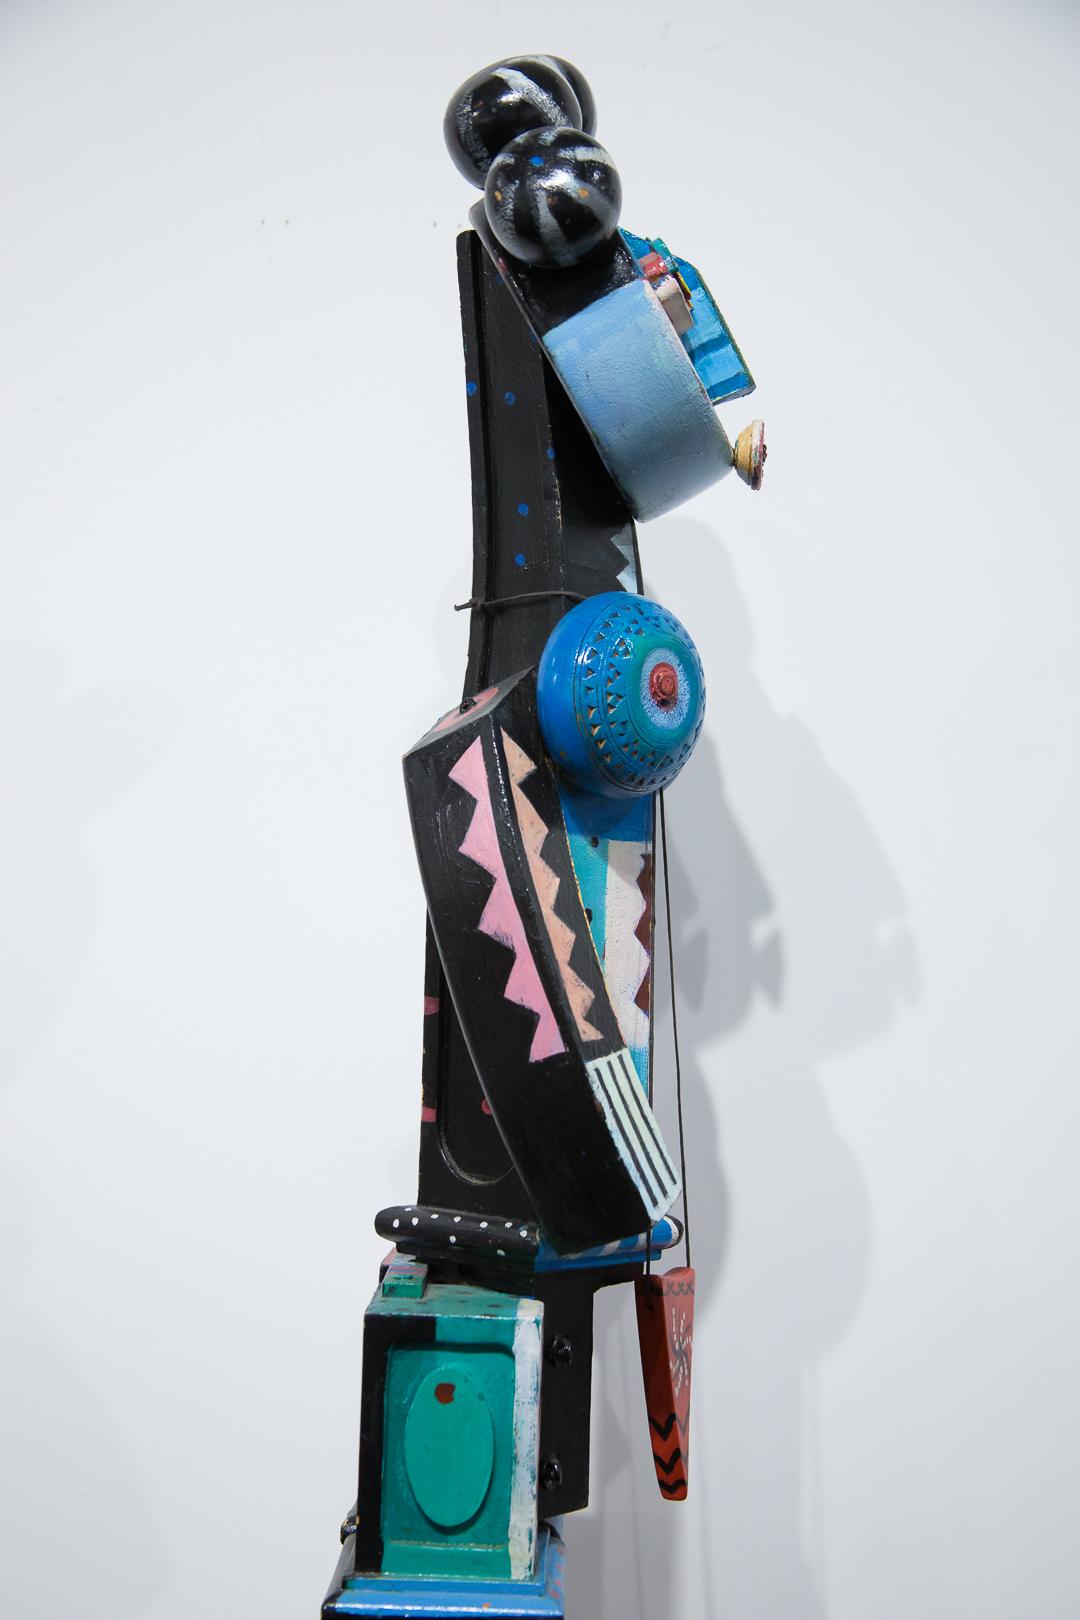 “Abstract Woman” is one of Calloway’s  eclectic  sculptures. It is made of found objects that he has organized into what can be recognized as a female body and painted in numerous colors and designs that produce a delightful piece of art. The